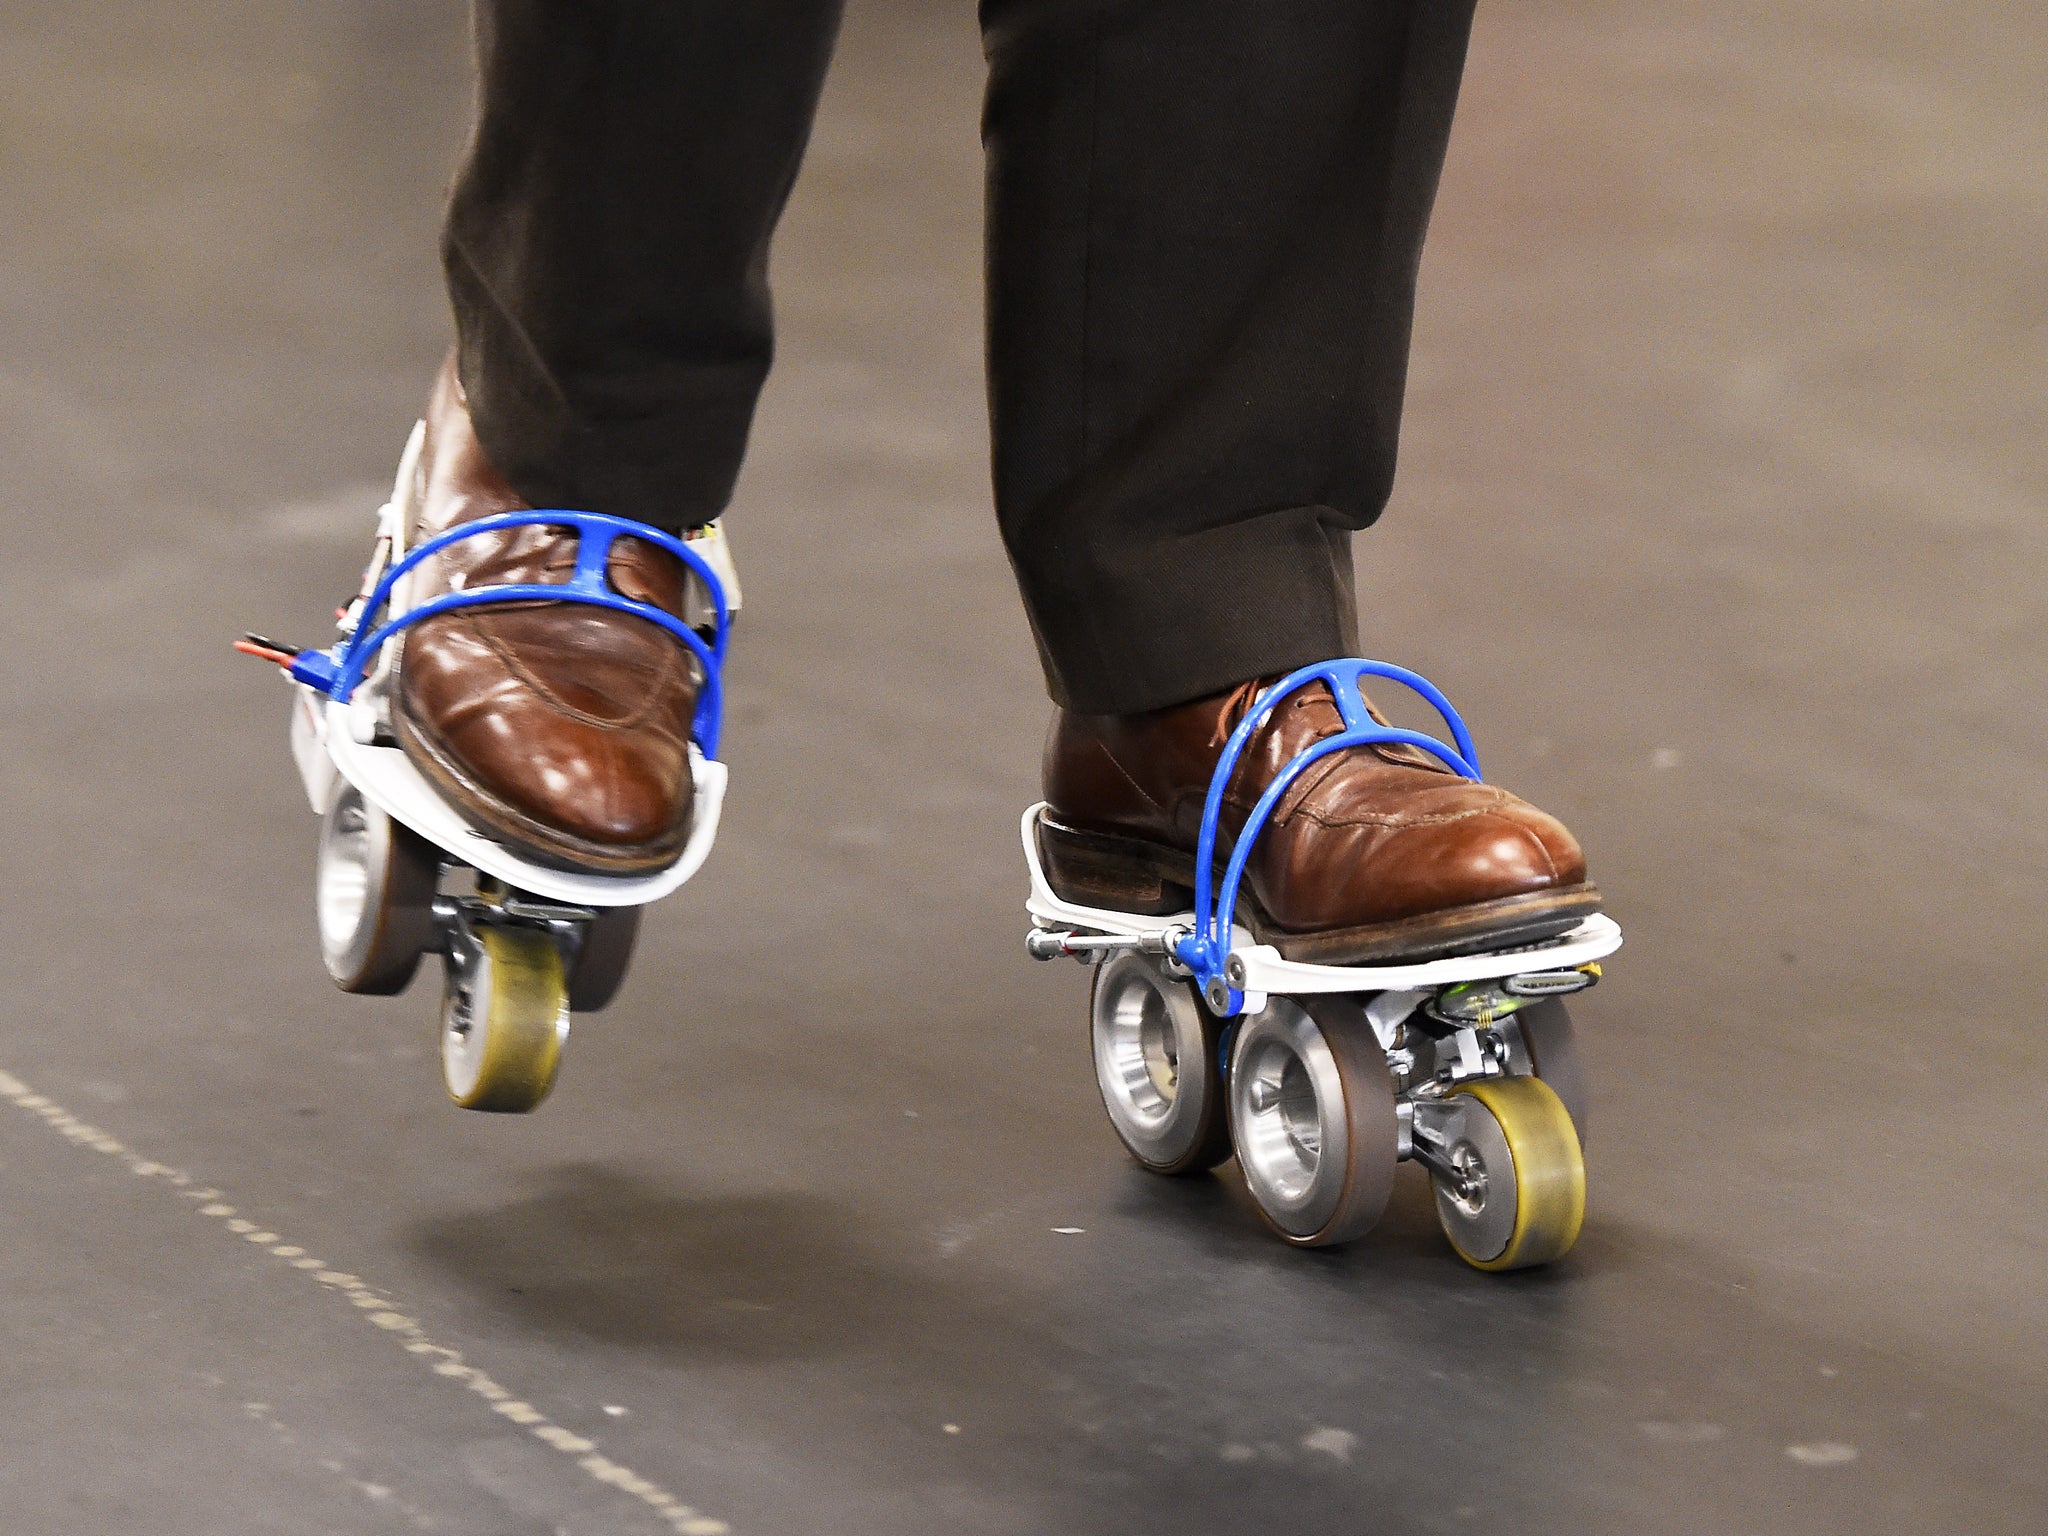 Rollkers, a transportation accessory that increases a person's average walking rate up to 7 miles per hour, is seen in use on January 4, 2014